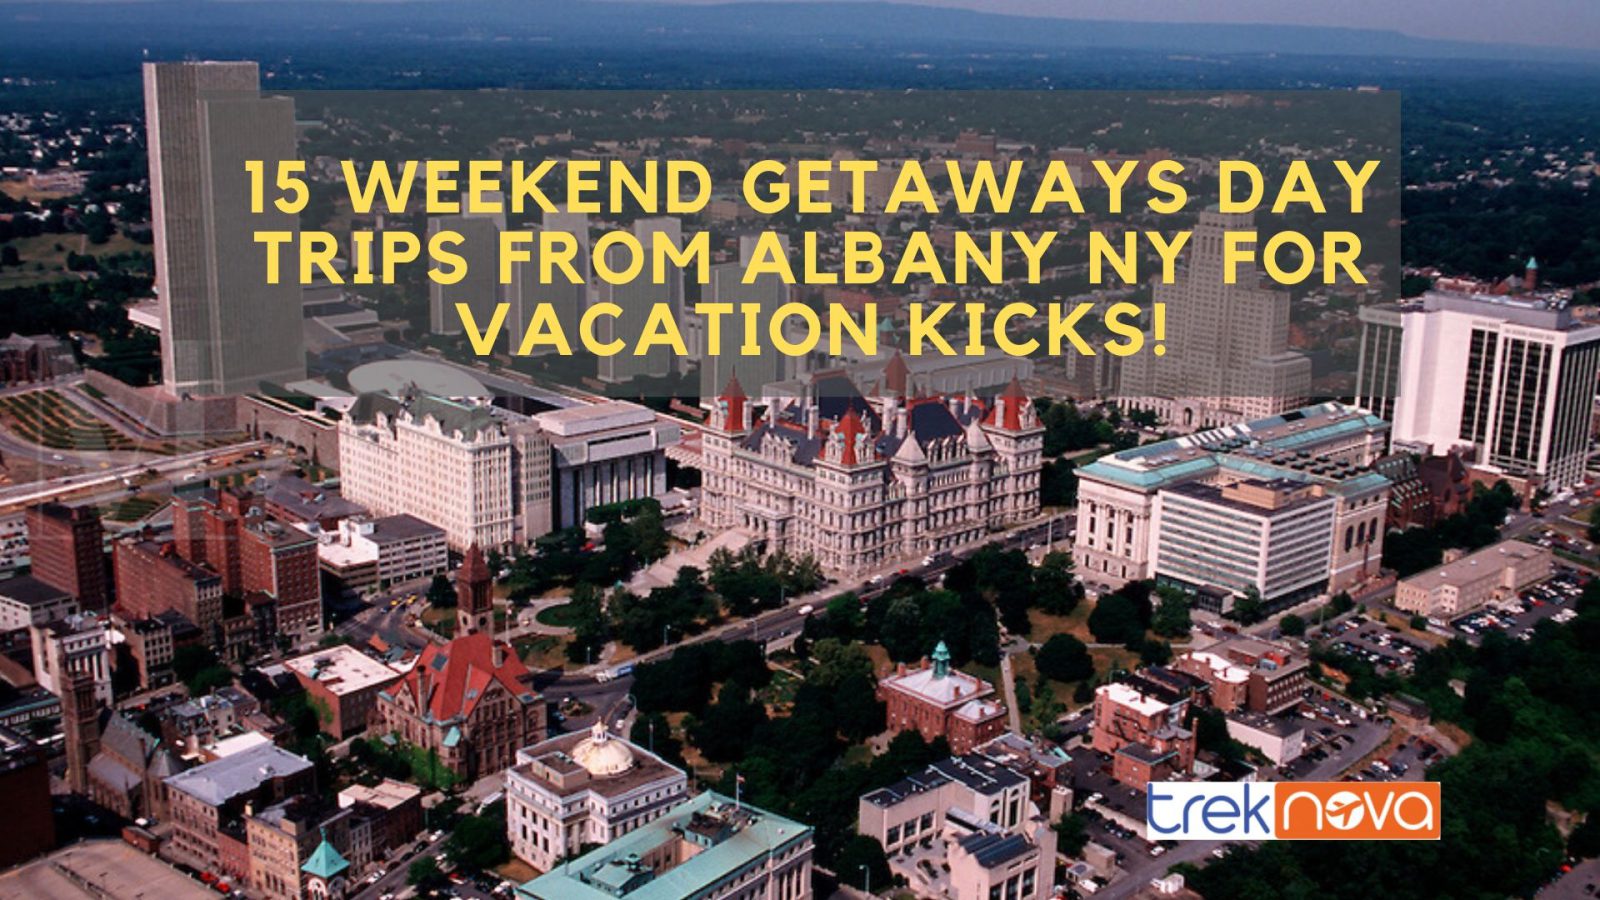 15 Weekend Getaways Day Trips From Albany NY For Vacation Kicks!